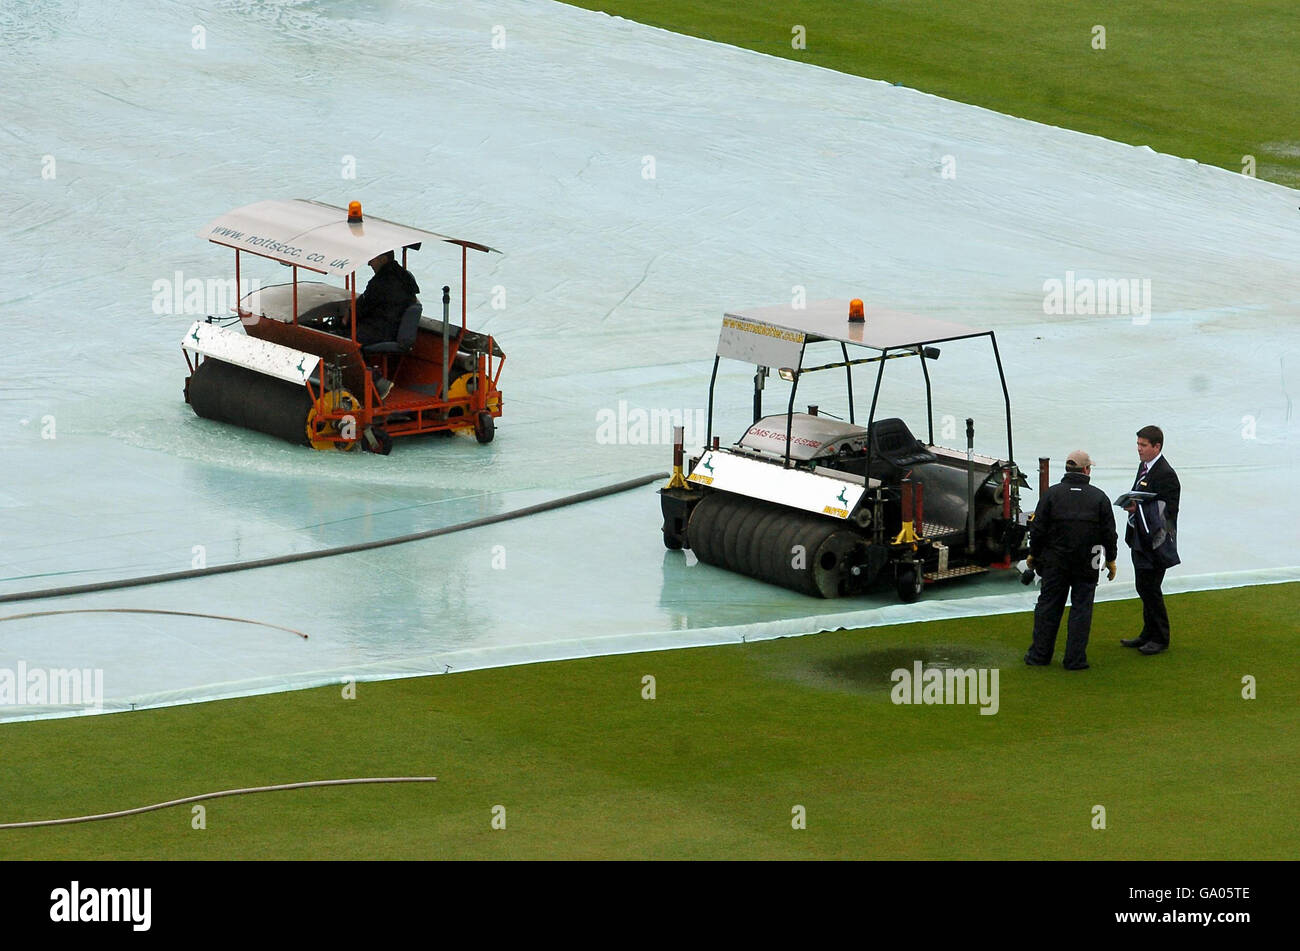 Groundstaff attempt to clear water from the pitch as rain delays play in The Friends Provident match between Nottinghamshire and Derbyshire at Trent Bridge, Nottingham. Stock Photo